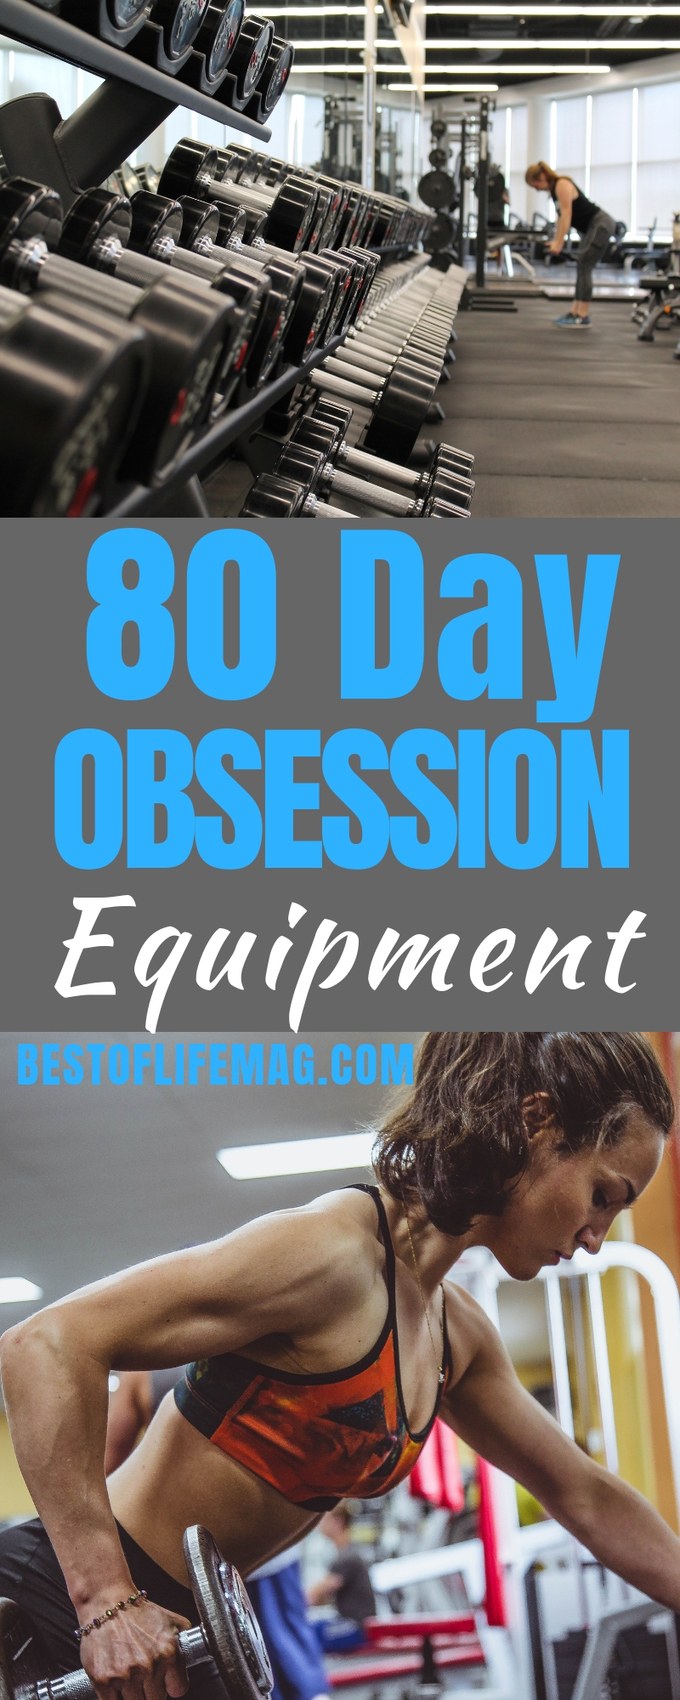 Having the necessary 80 Day Obsession equipment and supplies on hand for the 80 Day Obsession workout will help you get maximum results. Beachbody on Demand | Beachbody Workouts | 21 Day Fix Workouts | A Little Obsessed | 80 Day Obsession Beachbody | Workouts for Women | Workouts for Men | At Home Workouts #80dayobsession